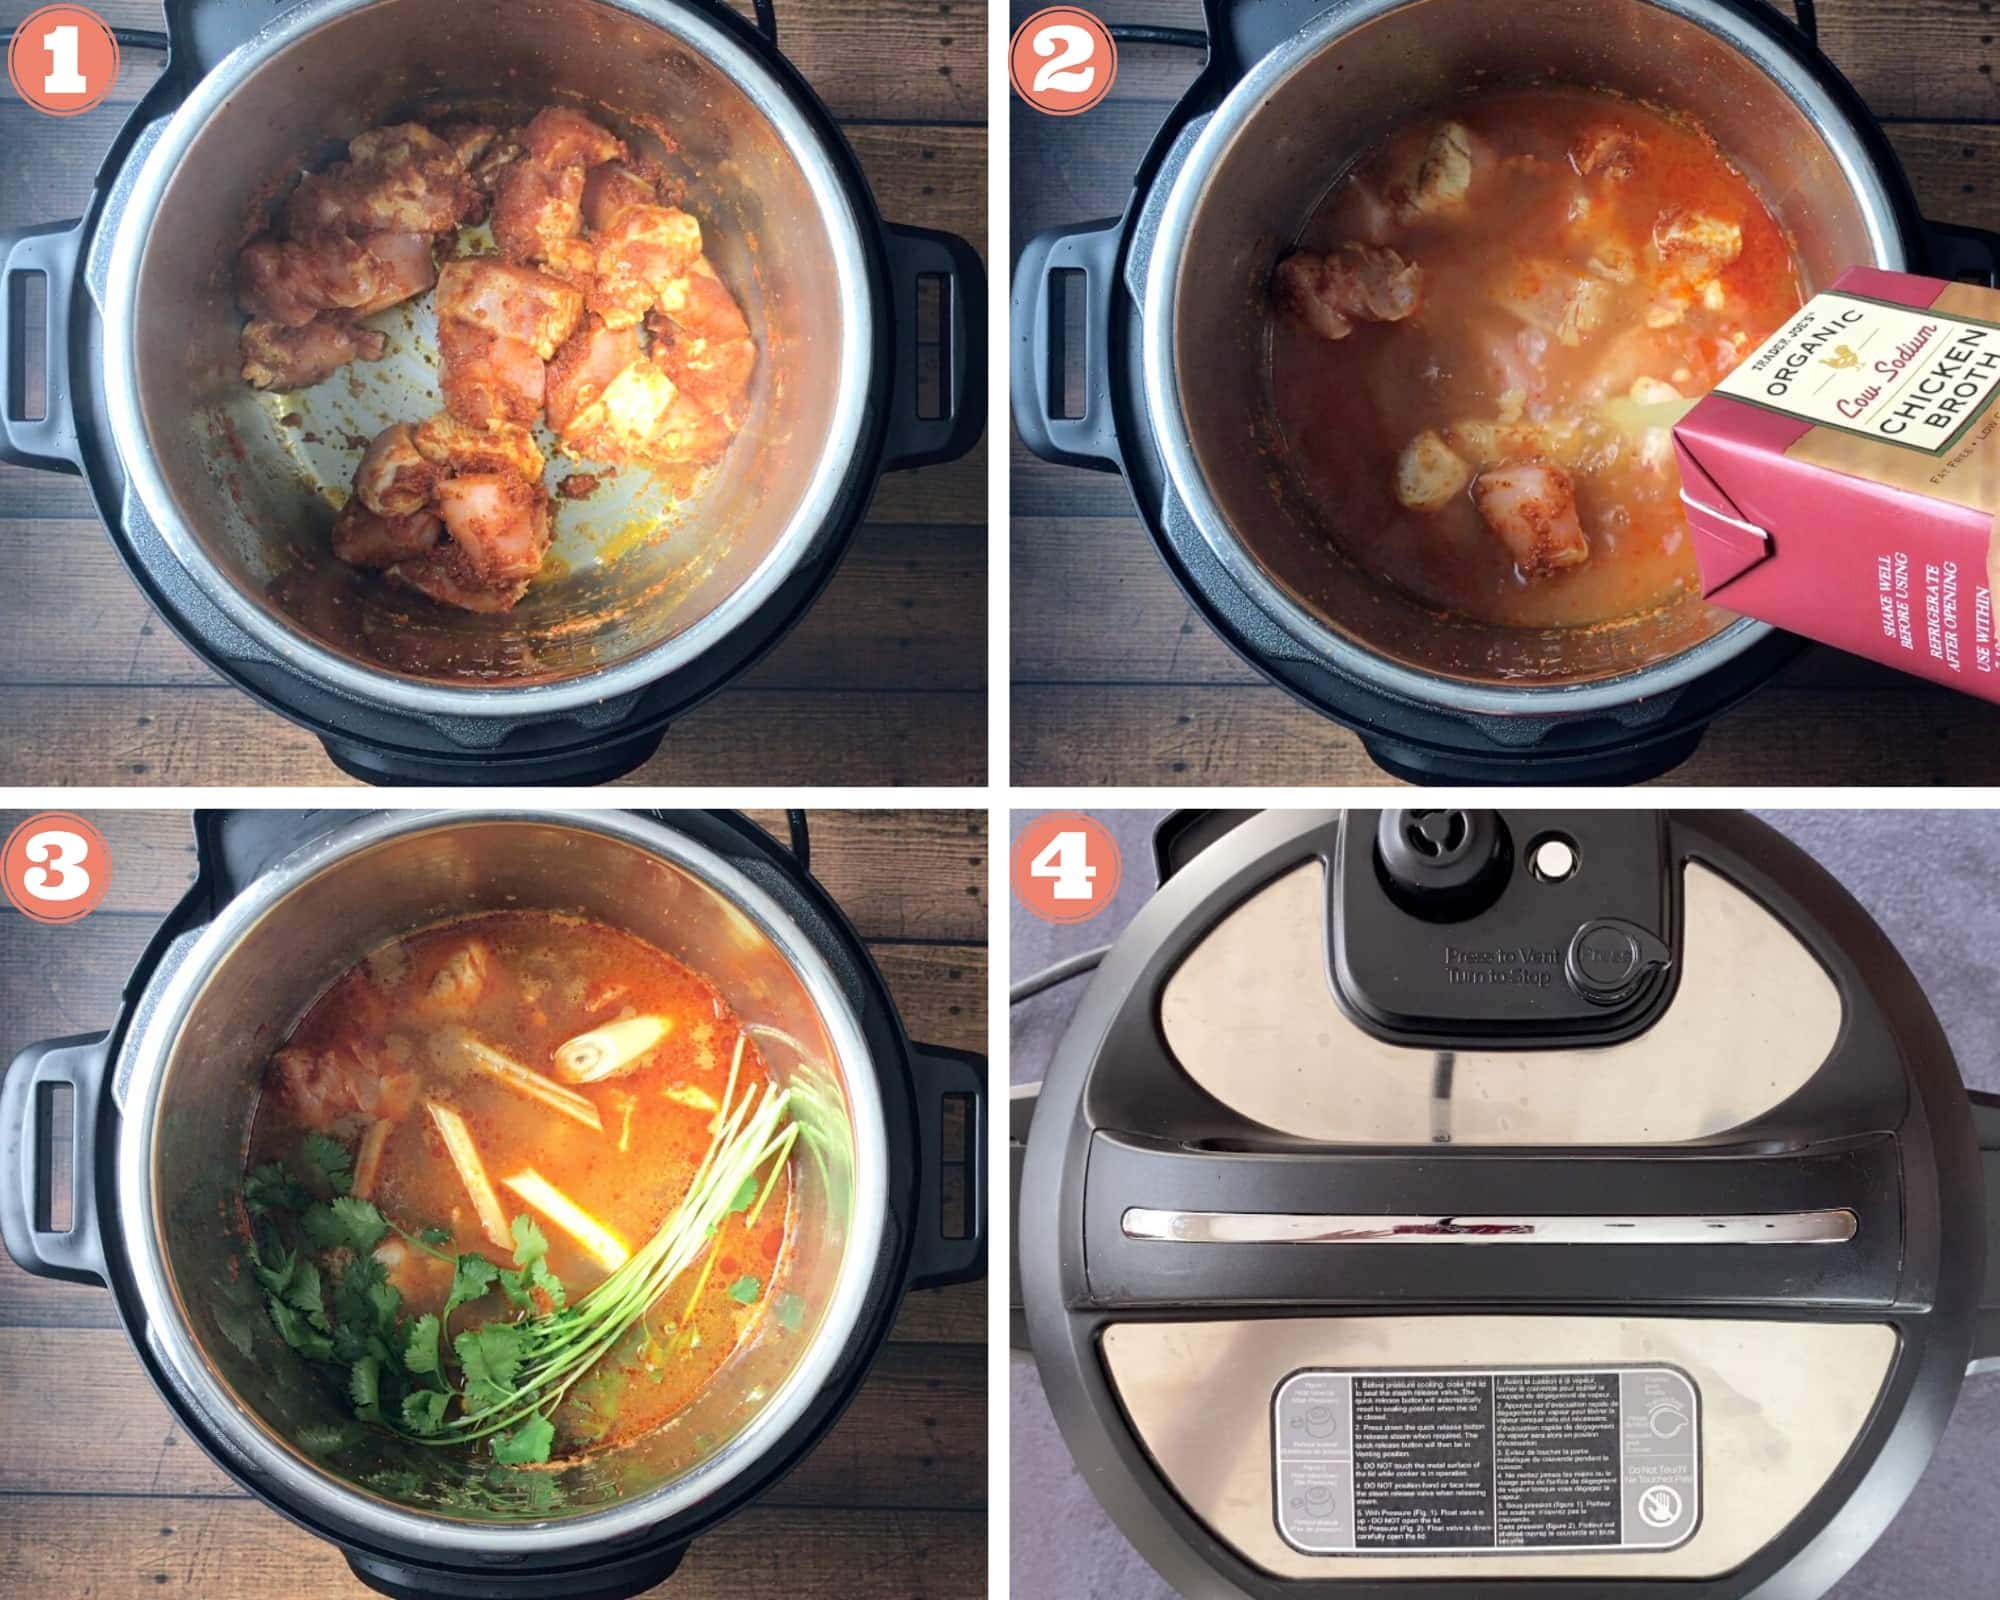 Sauteing chicken in thai curry paste, adding broth to the Instant Pot